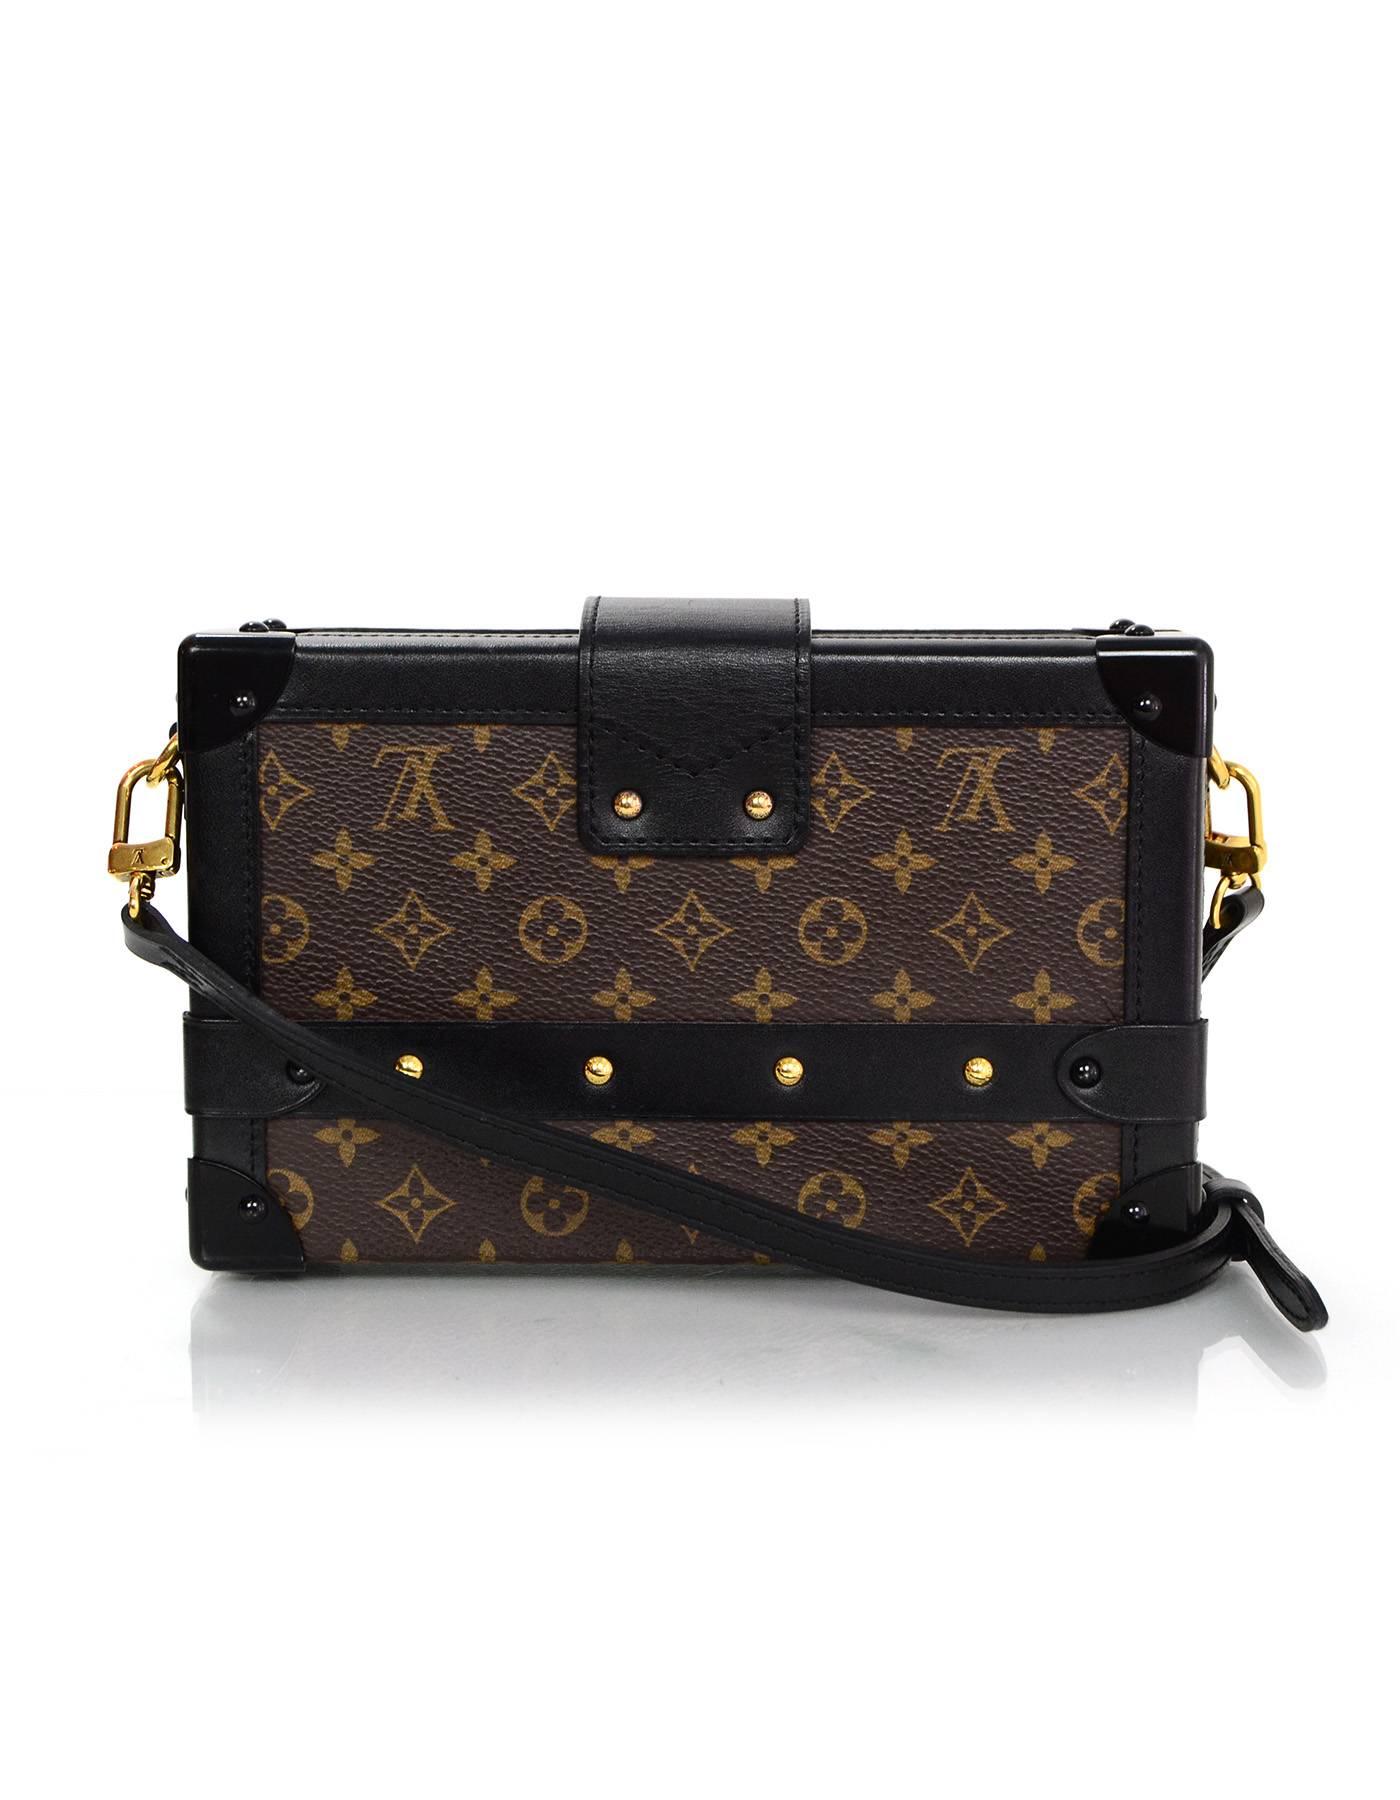 Louis Vuitton Monogram Petite Malle Trunk Crossbody Bag
Features optional and adjustable shoulder/crossbody strap

Made In: France
Year of Production: 2014
Color: Brown, black and red
Hardware: Goldtone
Materials: Coated canvas and leather
Lining: